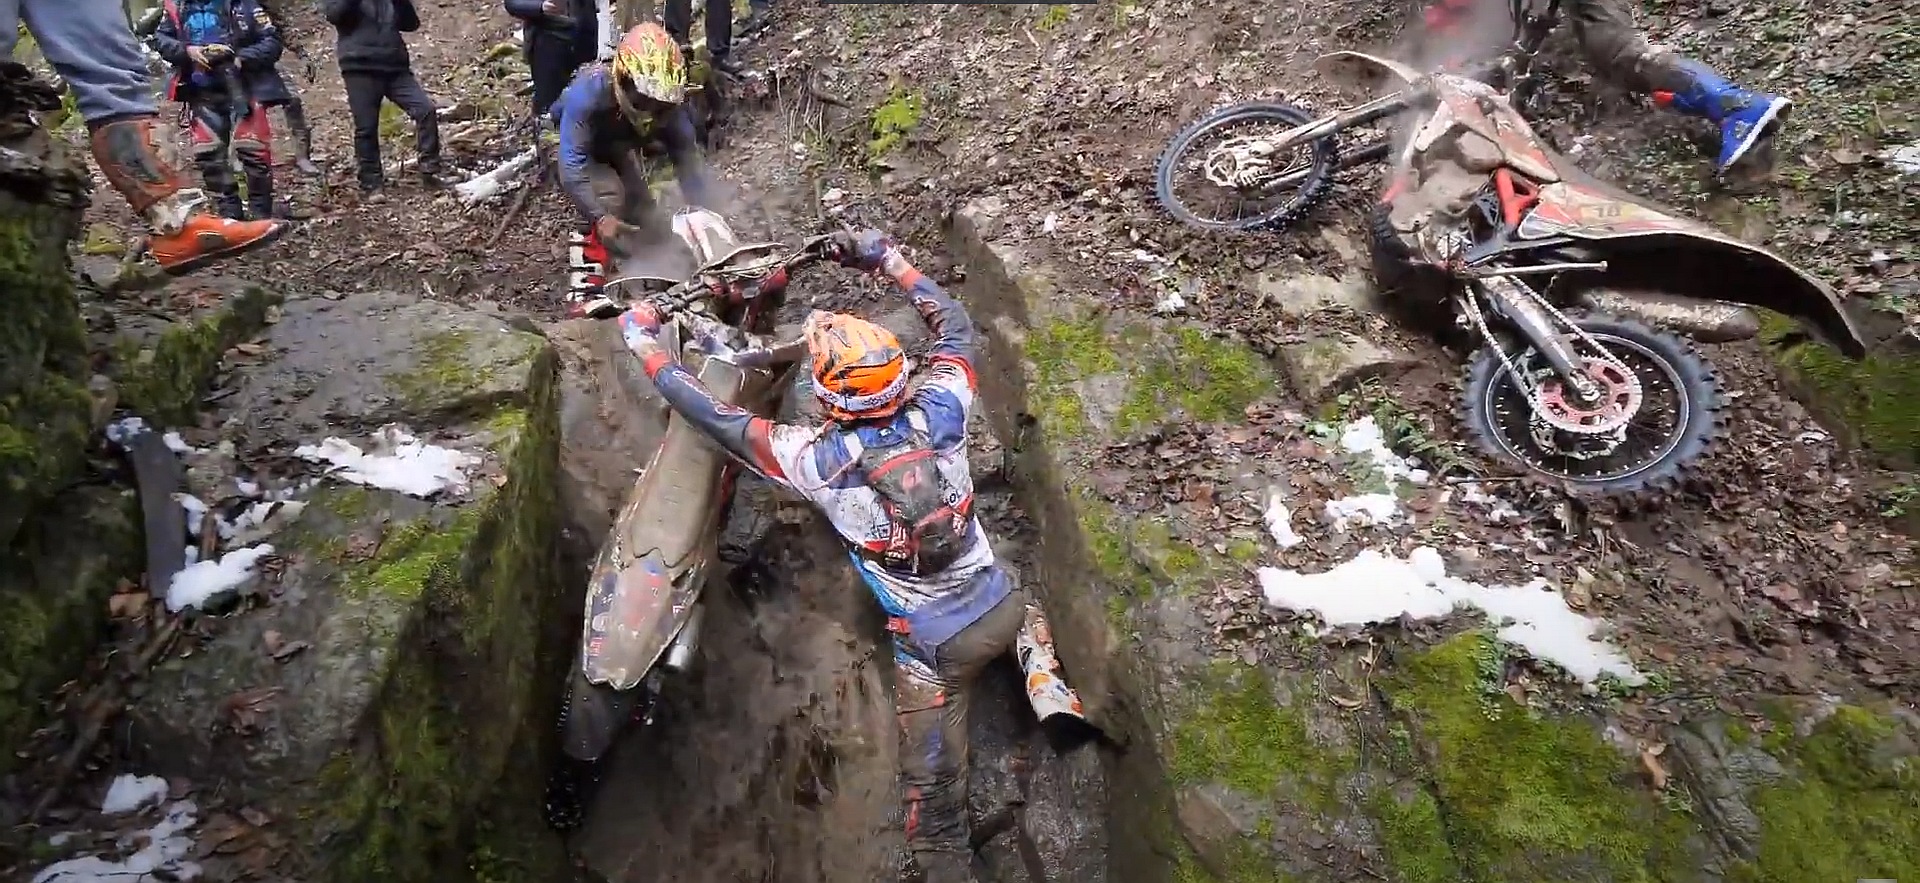 king of the hill hard enduro 2020 highlights video+